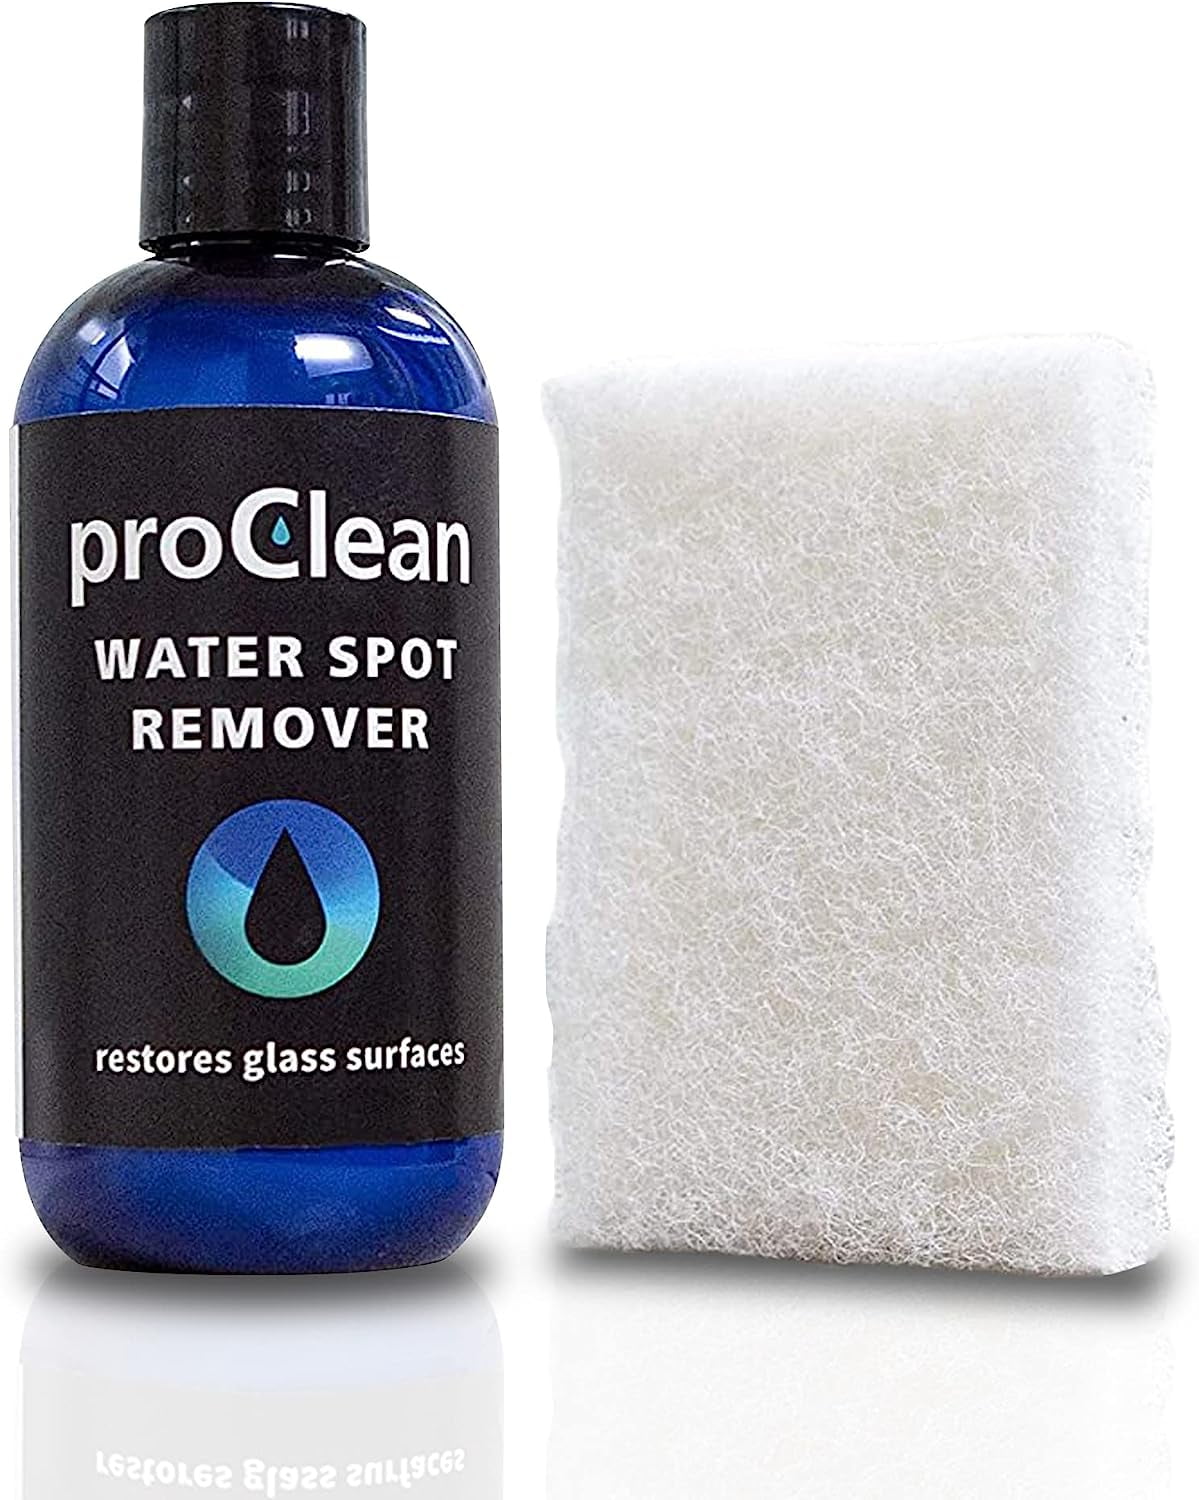 Easily remove water spots with Heavy Duty Water Spot Remover Gel! #cle